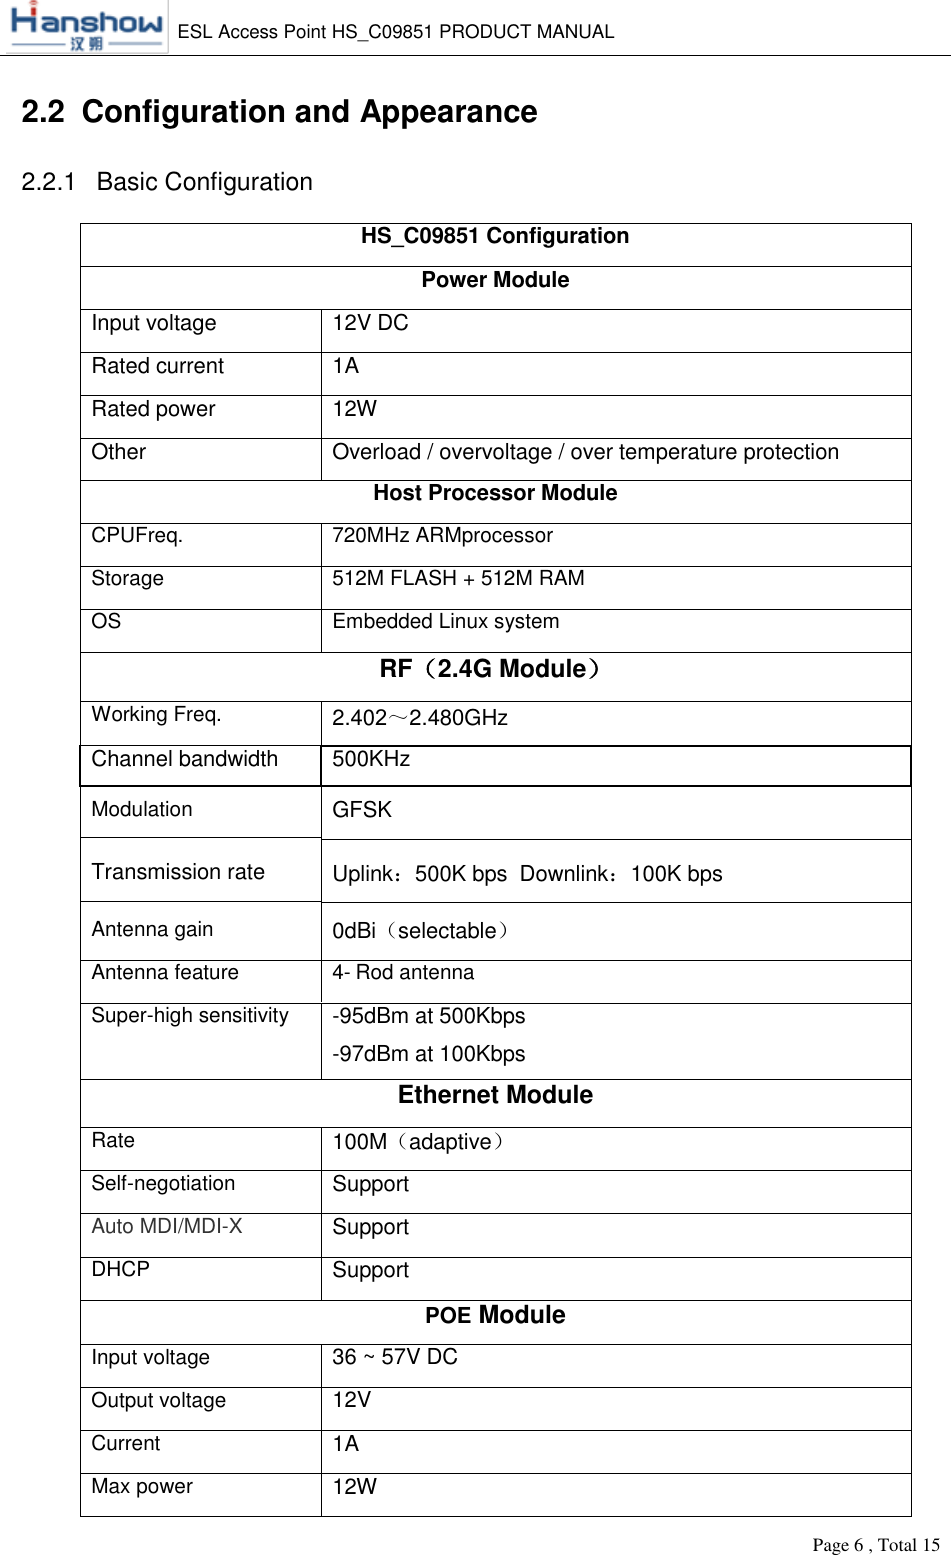 ESL Access Point HS_C09851 PRODUCT MANUAL  Page 6 , Total 15 2.2  Configuration and Appearance 2.2.1  Basic Configuration HS_C09851 Configuration Power Module Input voltage 12V DC Rated current 1A Rated power 12W Other Overload / overvoltage / over temperature protection Host Processor Module CPUFreq. 720MHz ARMprocessor Storage 512M FLASH + 512M RAM OS Embedded Linux system RF（2.4G Module）Working Freq. 2.402～2.480GHz Channel bandwidth 500KHz Modulation GFSKTransmission rate Uplink：500K bps  Downlink：100K bps Antenna gain 0dBi（selectable） Antenna feature 4-  Rod antennaSuper-high sensitivity -95dBm at 500Kbps -97dBm at 100Kbps Ethernet Module Rate 100M（adaptive） Self-negotiation Support Auto MDI/MDI-X Support DHCP Support POE Module Input voltage 36 ~ 57V DC Output voltage 12V Current 1A Max power 12W 